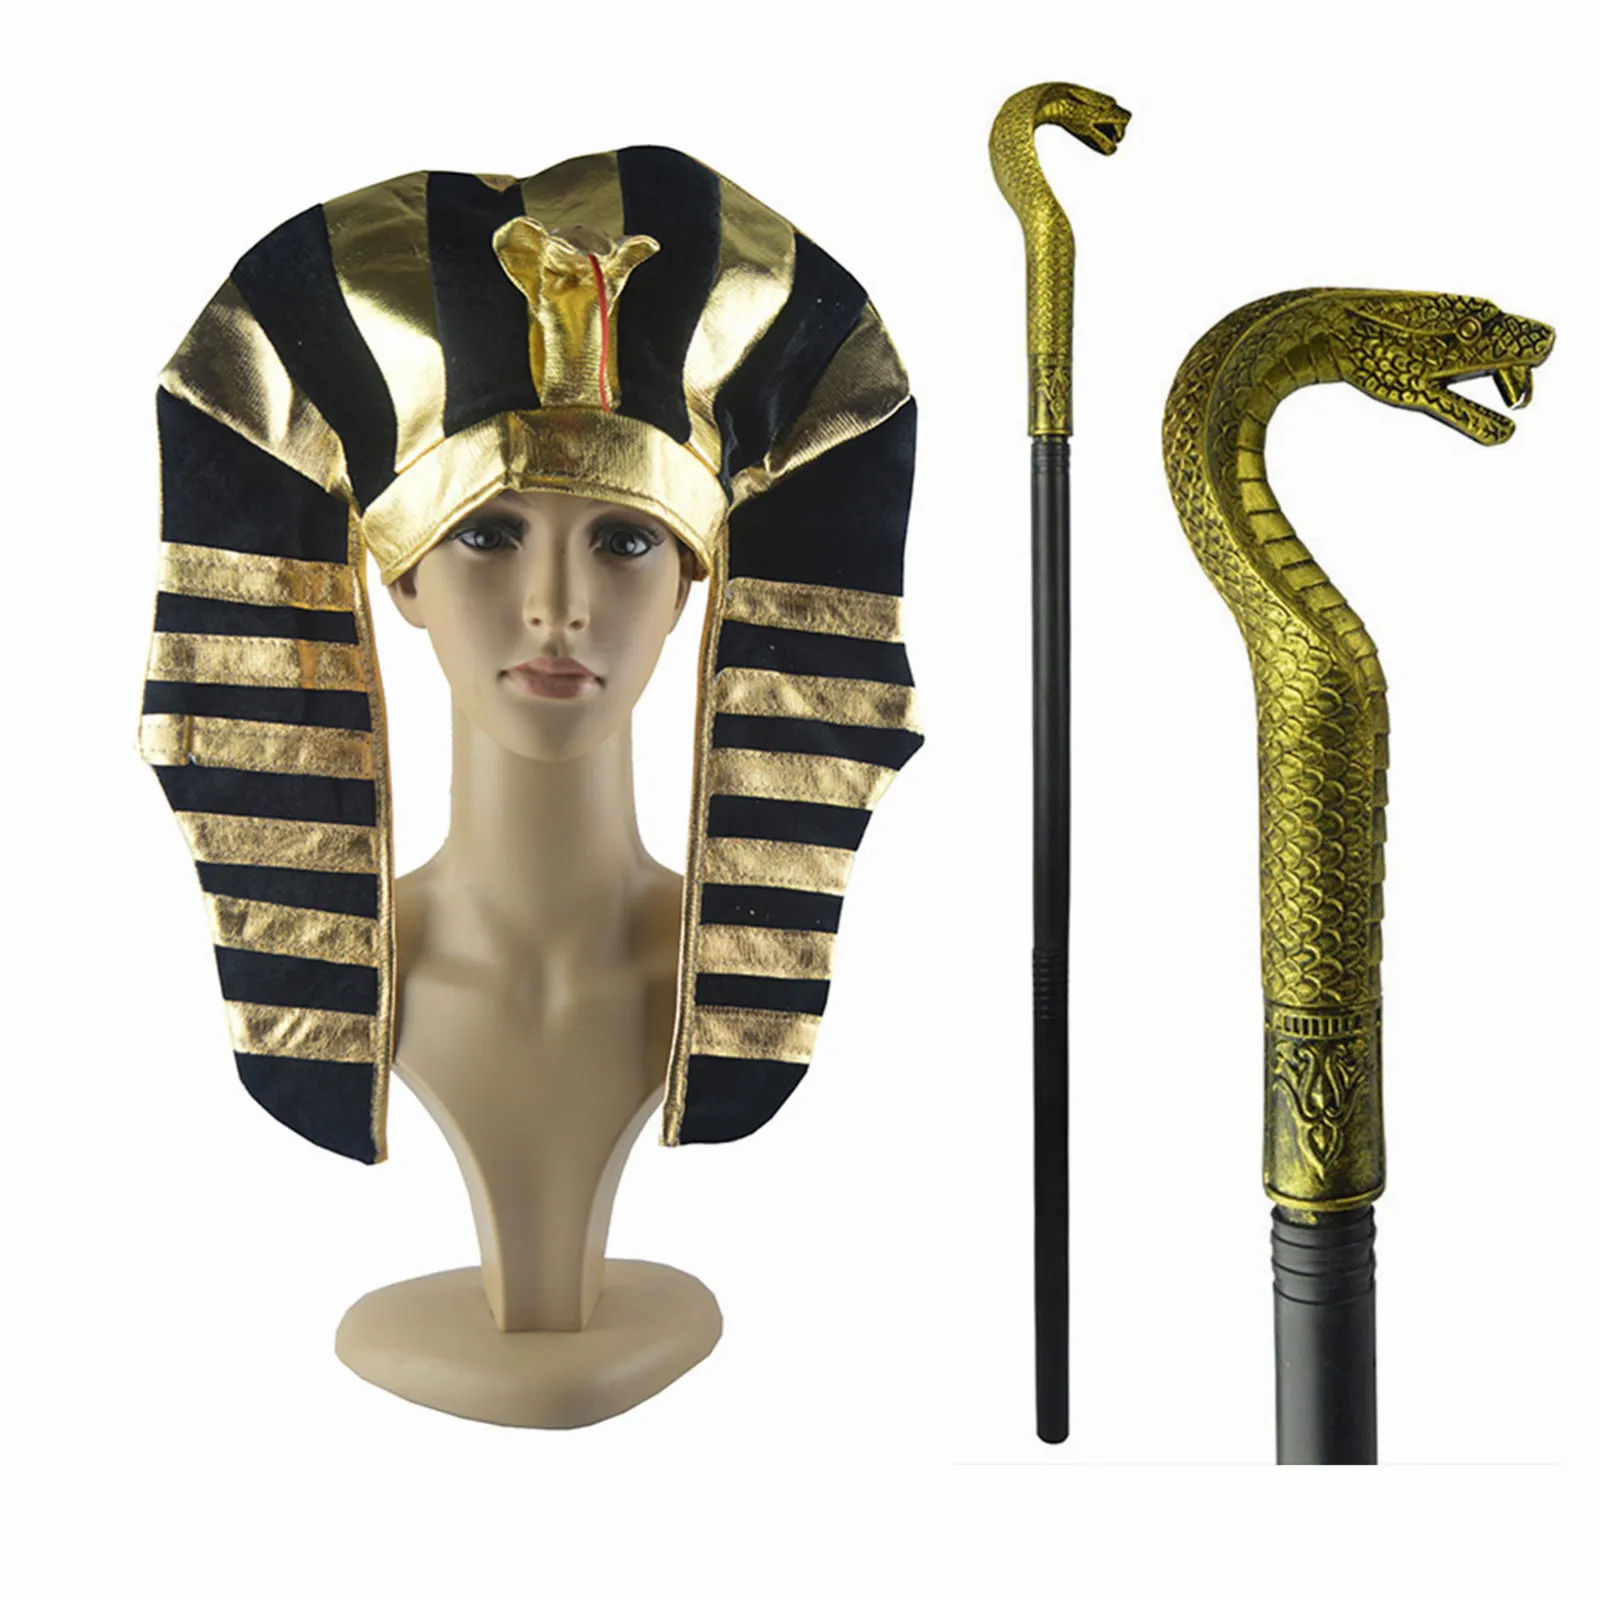 Egyptian Pharaoh Costume Accessories Golden Pharaoh King Hat Cleopatra Snake-shaped Hat with Scepter Halloween Cosplay Props